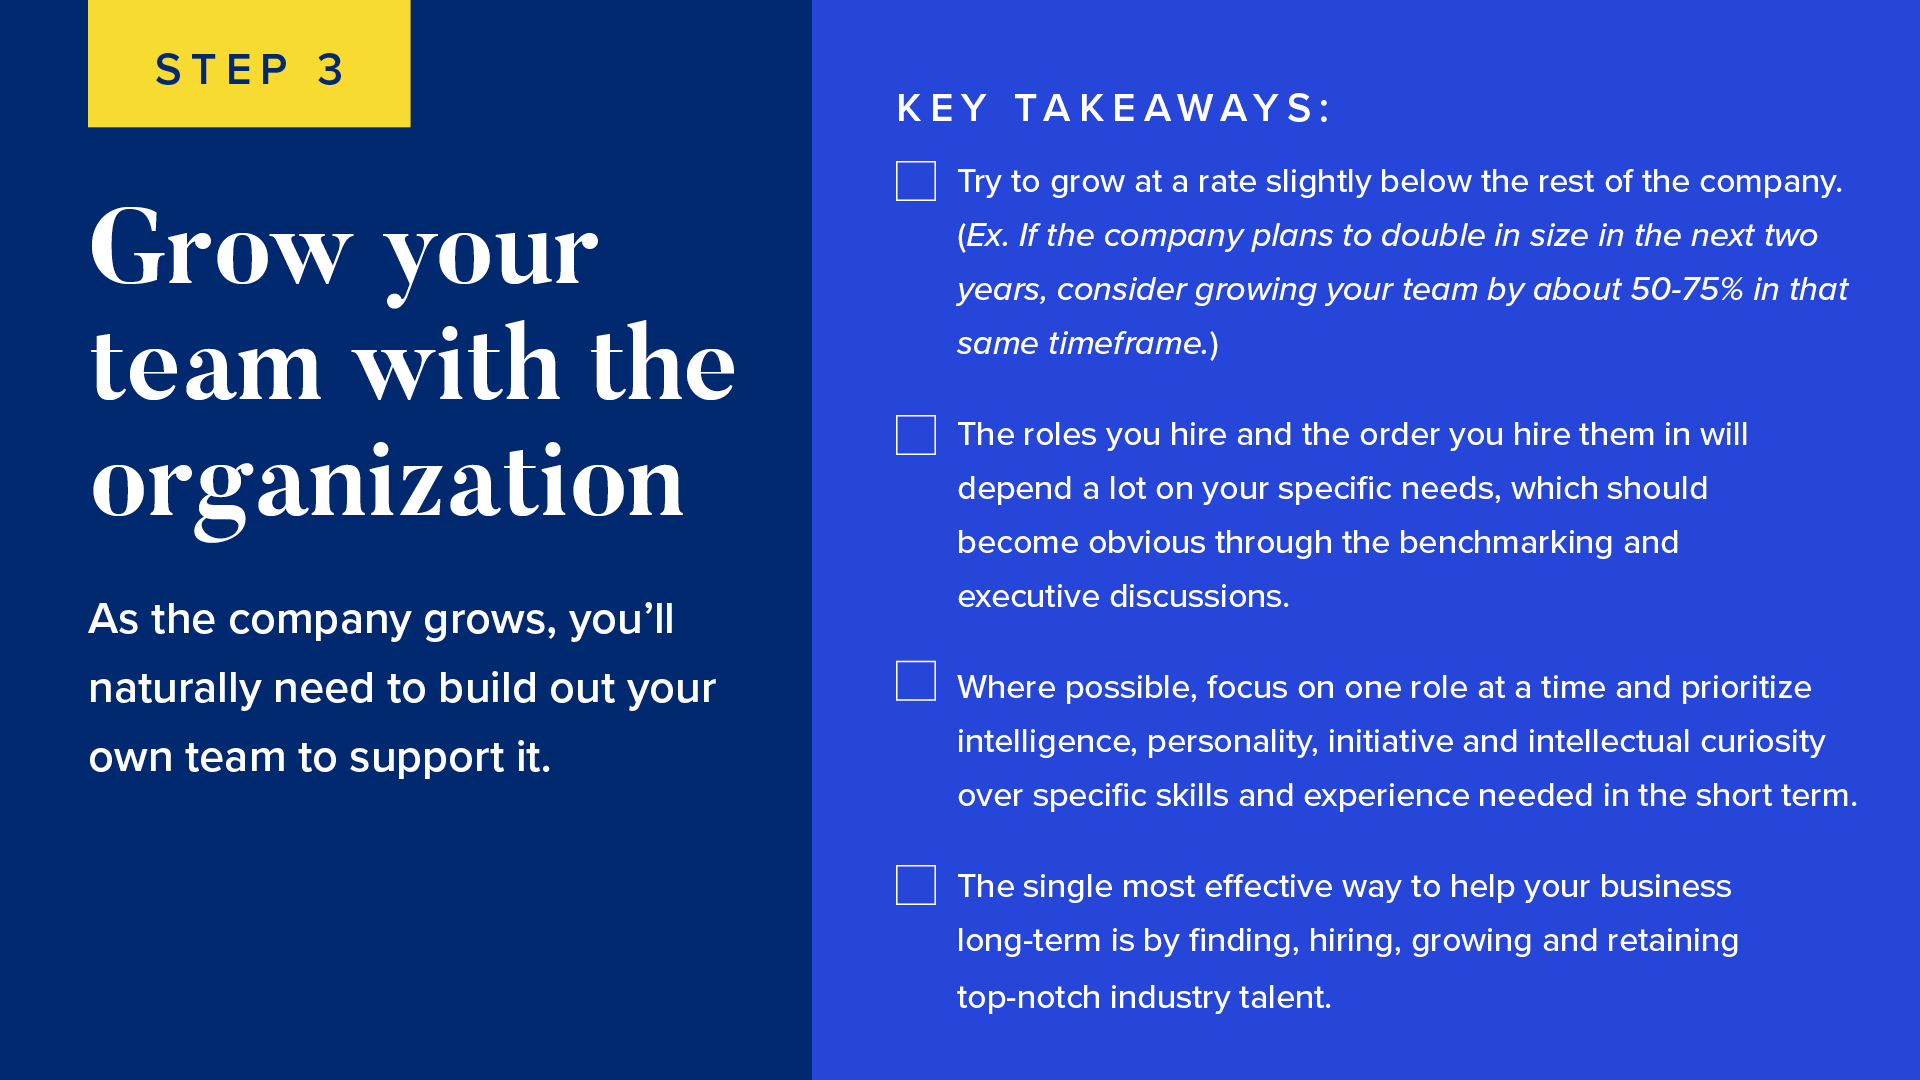 INFOGRAPHIC #3: Grow your team with the organization 


As the company grows, you’ll naturally need to build out your own team to support it.


Try to grow at a rate slightly below the rest of the company. (Ex. If the company plans to double in size in the next two years, consider growing your team by about 50-75% in that same timeframe.)
The roles you hire and the order you hire them in will depend a lot on your specific needs, which should become obvious through the benchmarking and executive discussions.
Where possible, focus on one role at a time and prioritize intelligence, personality, initiative and intellectual curiosity over specific skills and experience needed in the short-term.
The single most effective way to help your business long-term is by finding, hiring, growing and retaining top-notch industry talent.
